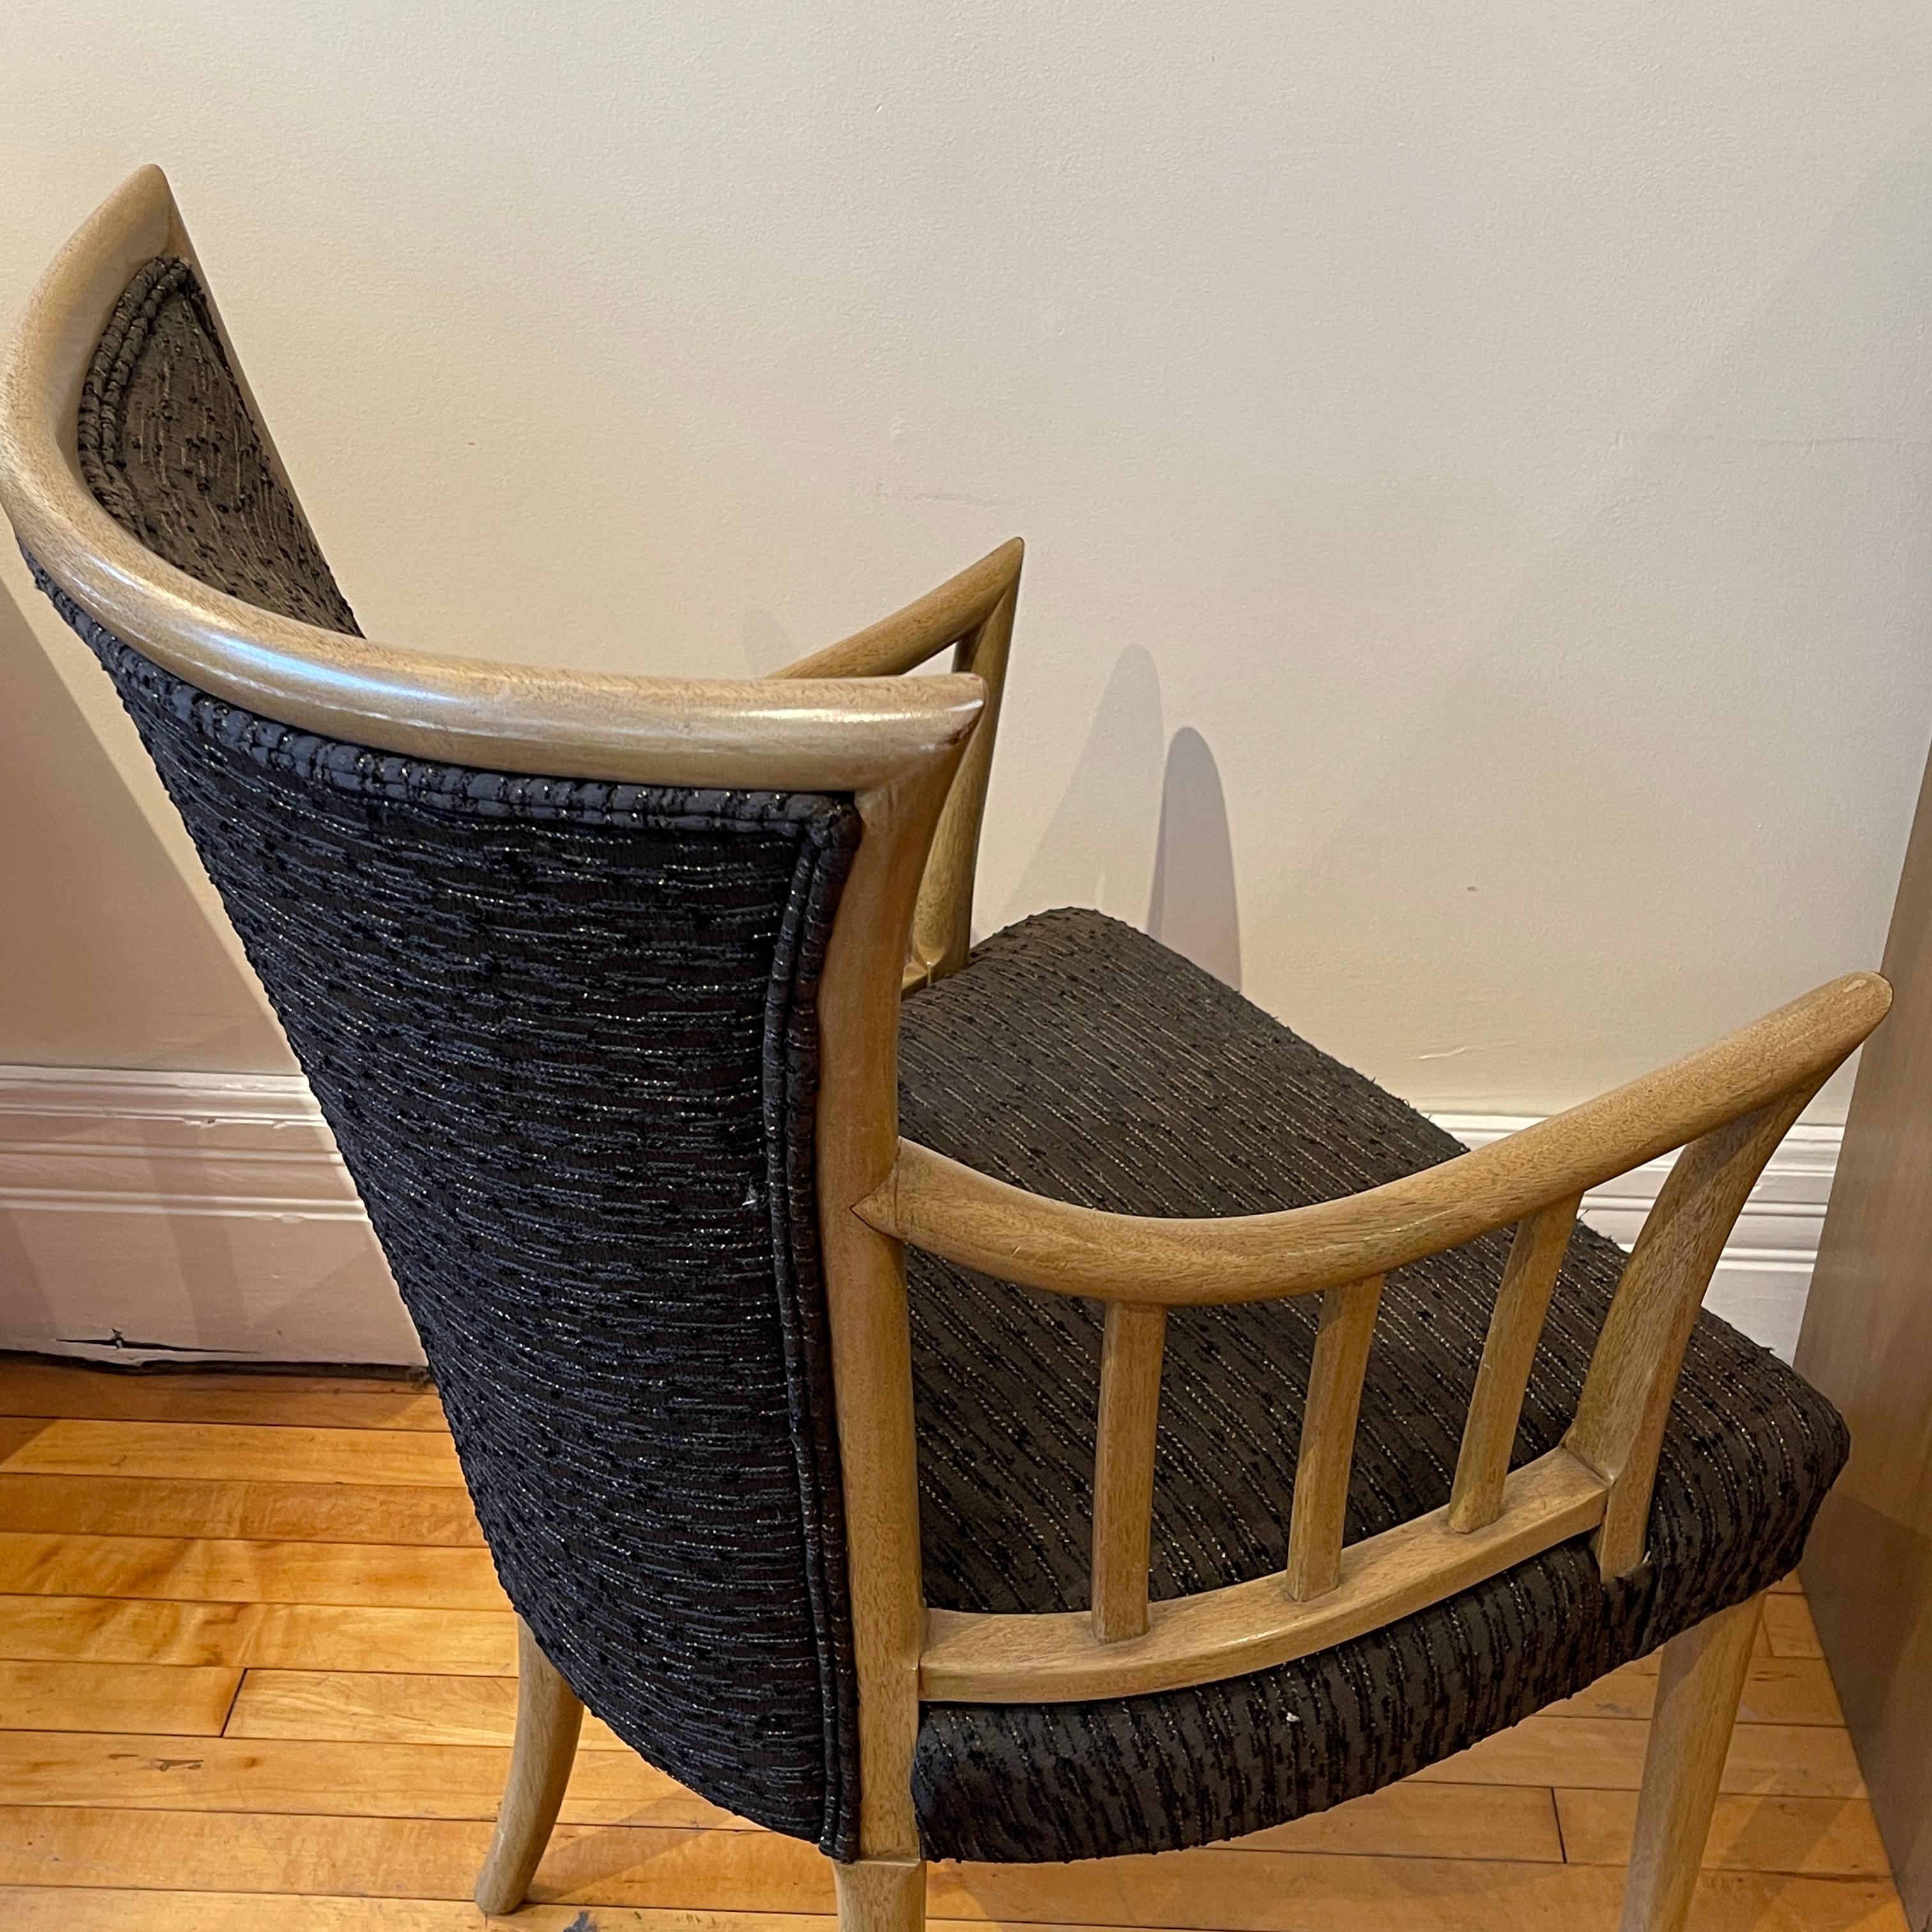 Carved Elegant Sculptural Wood Framed Midcentury Chair by Weiman- Only one available For Sale